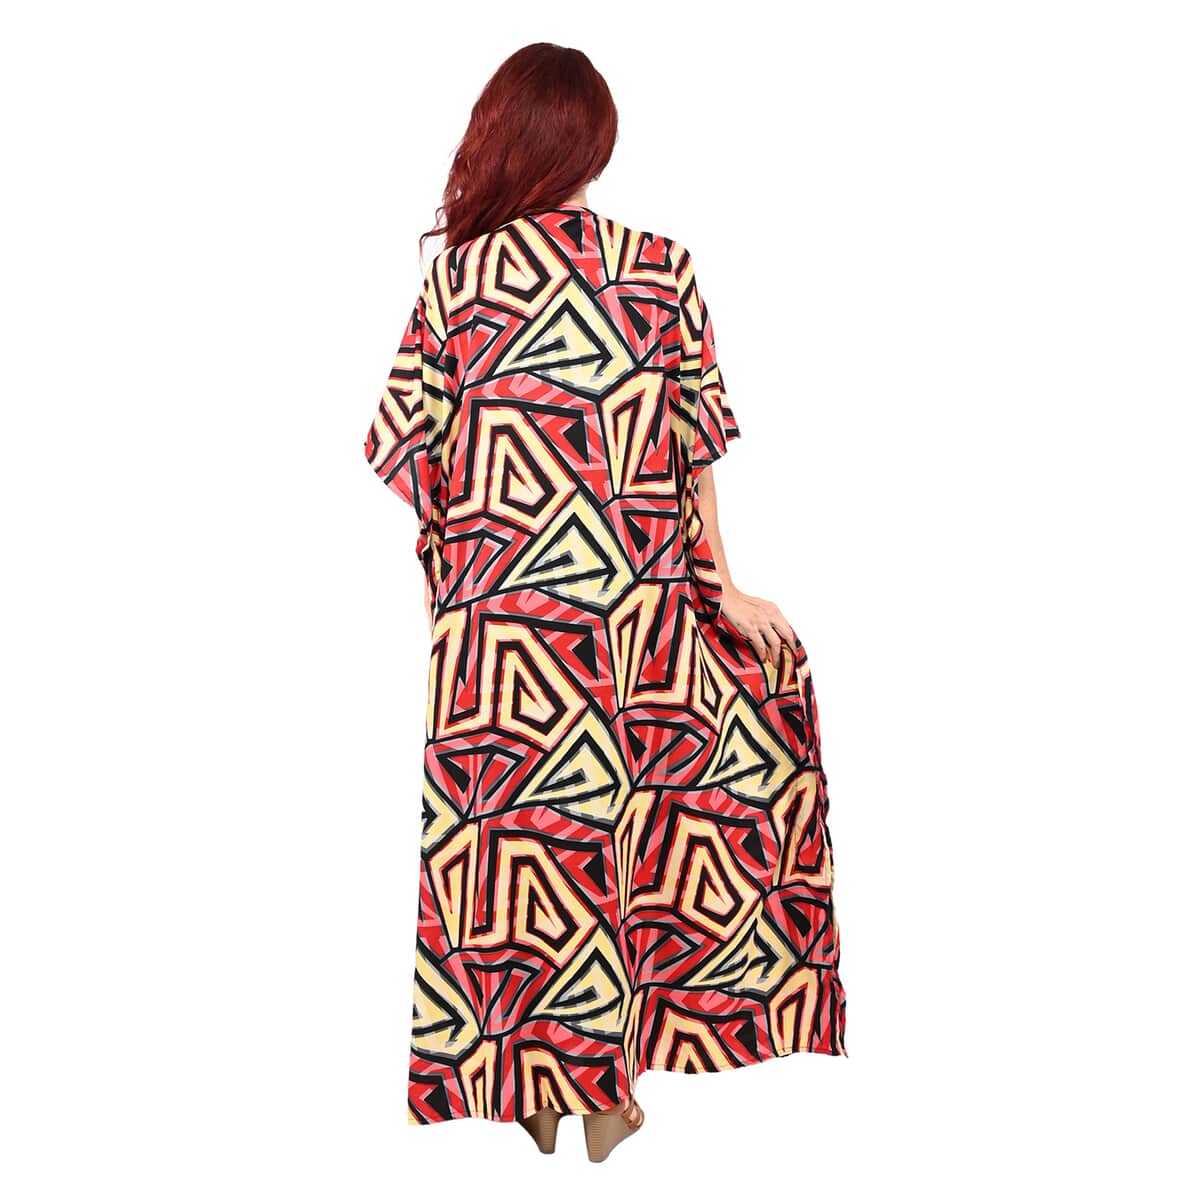 Winlar Red Triangle Print V-Neck Long Microfiber Kaftan Dress - One Size Fits Most, Holiday Dress, Swimsuit Cover Up, Beach Cover Ups, Holiday Clothes image number 1